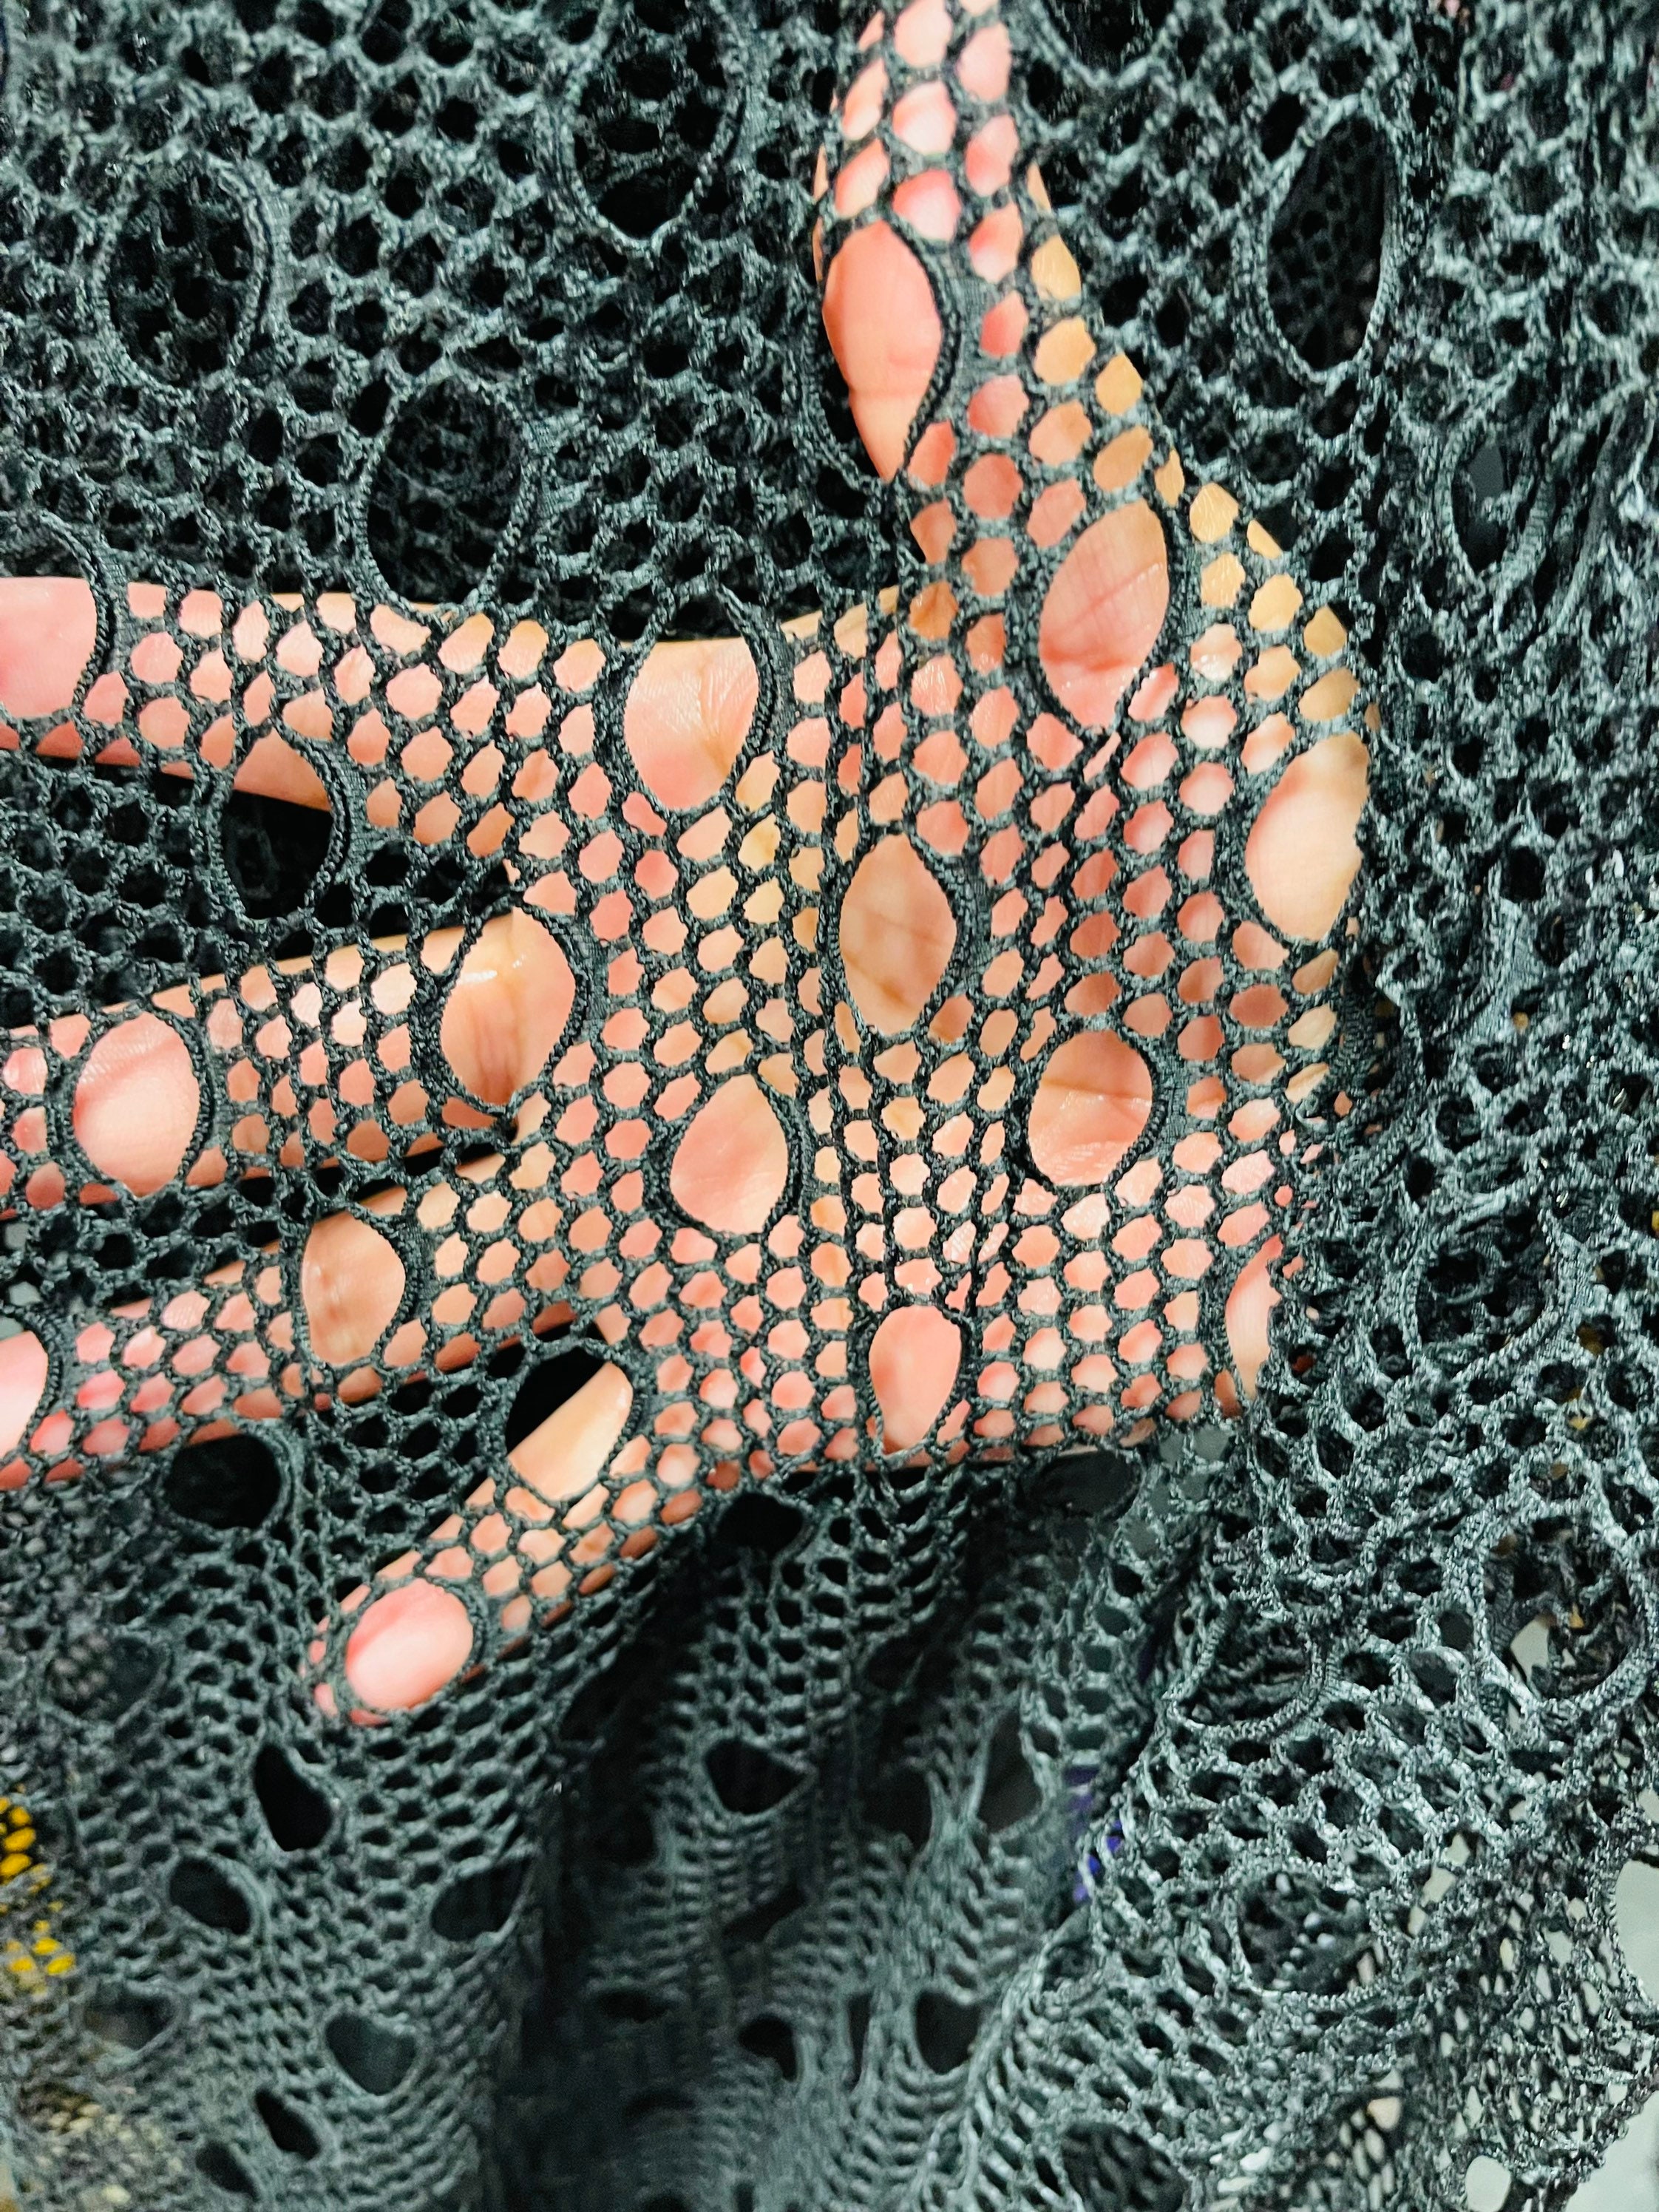 New Black Fishnet Geometric Design 4-way Stretch 58/60 Sold by the YD.  Ships Worldwide From Los Angeles California USA. -  Hong Kong